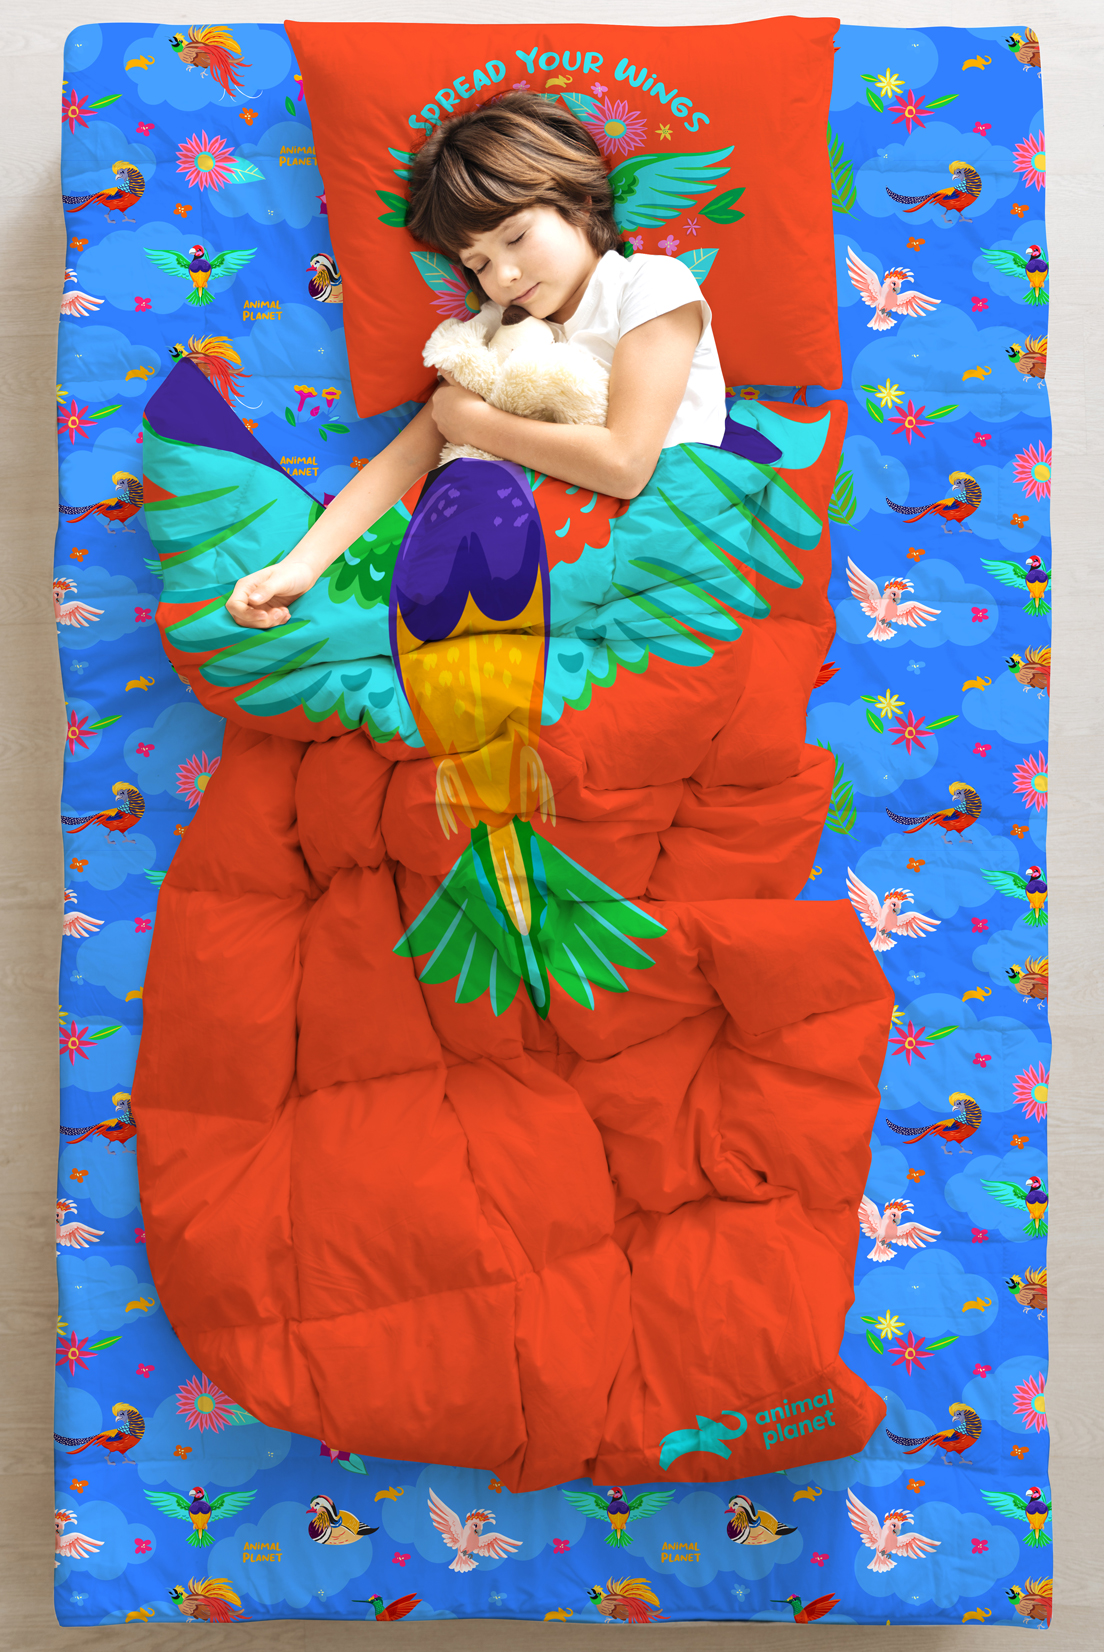 Girl in sleeping back emblazoned with large illustrated bird.